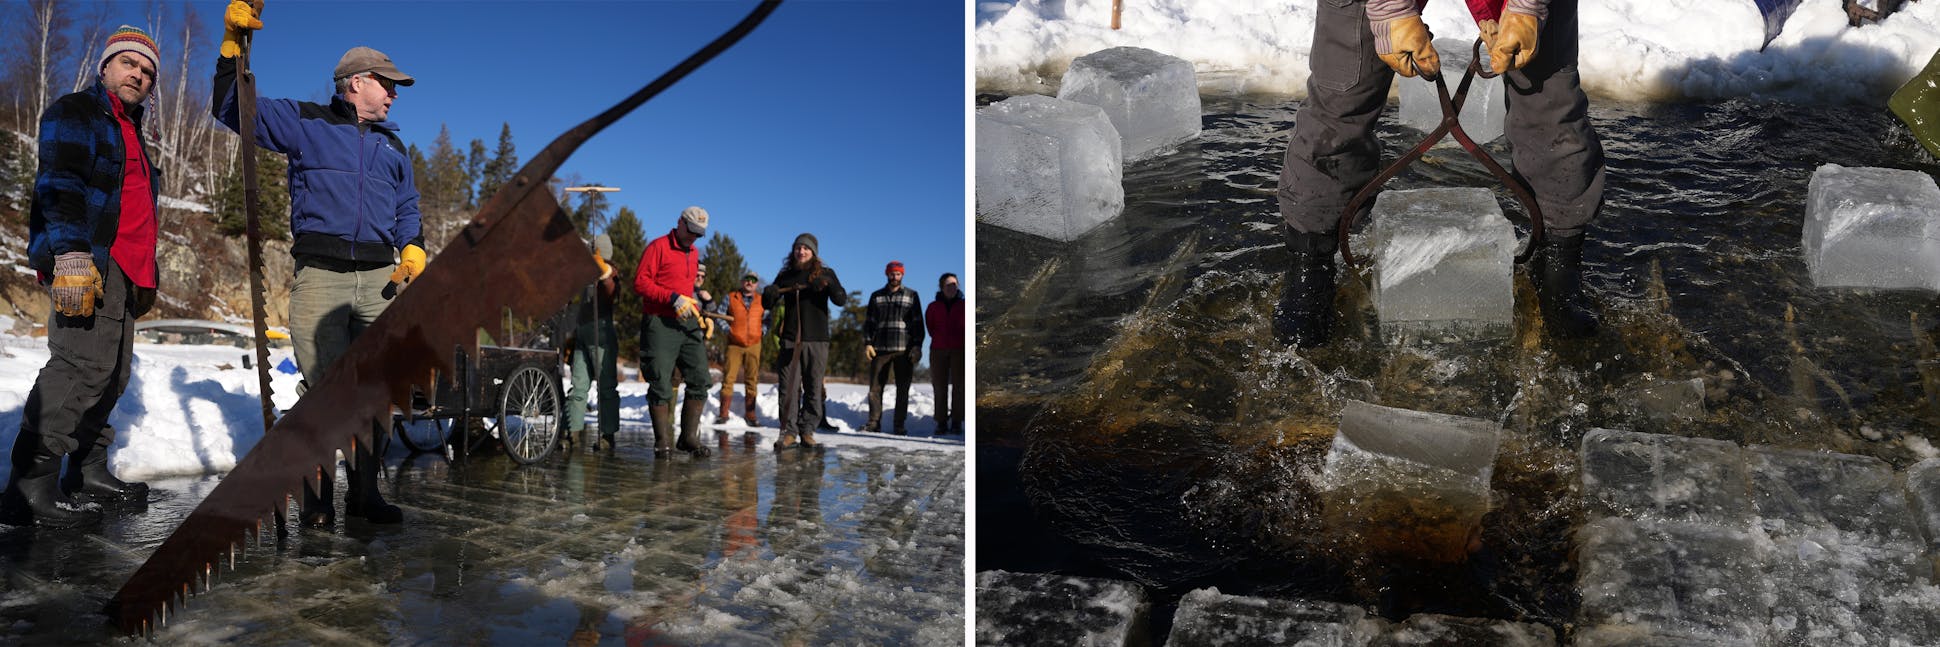 Left: Friends of Will Steger used hand saws to cut all the way through the ice on Pickett's Lake at the Steger Wilderness Center for the annual Ice Ball ice harvest on Feb. 3. Right: Participants pulled blocks of ice from the lake.